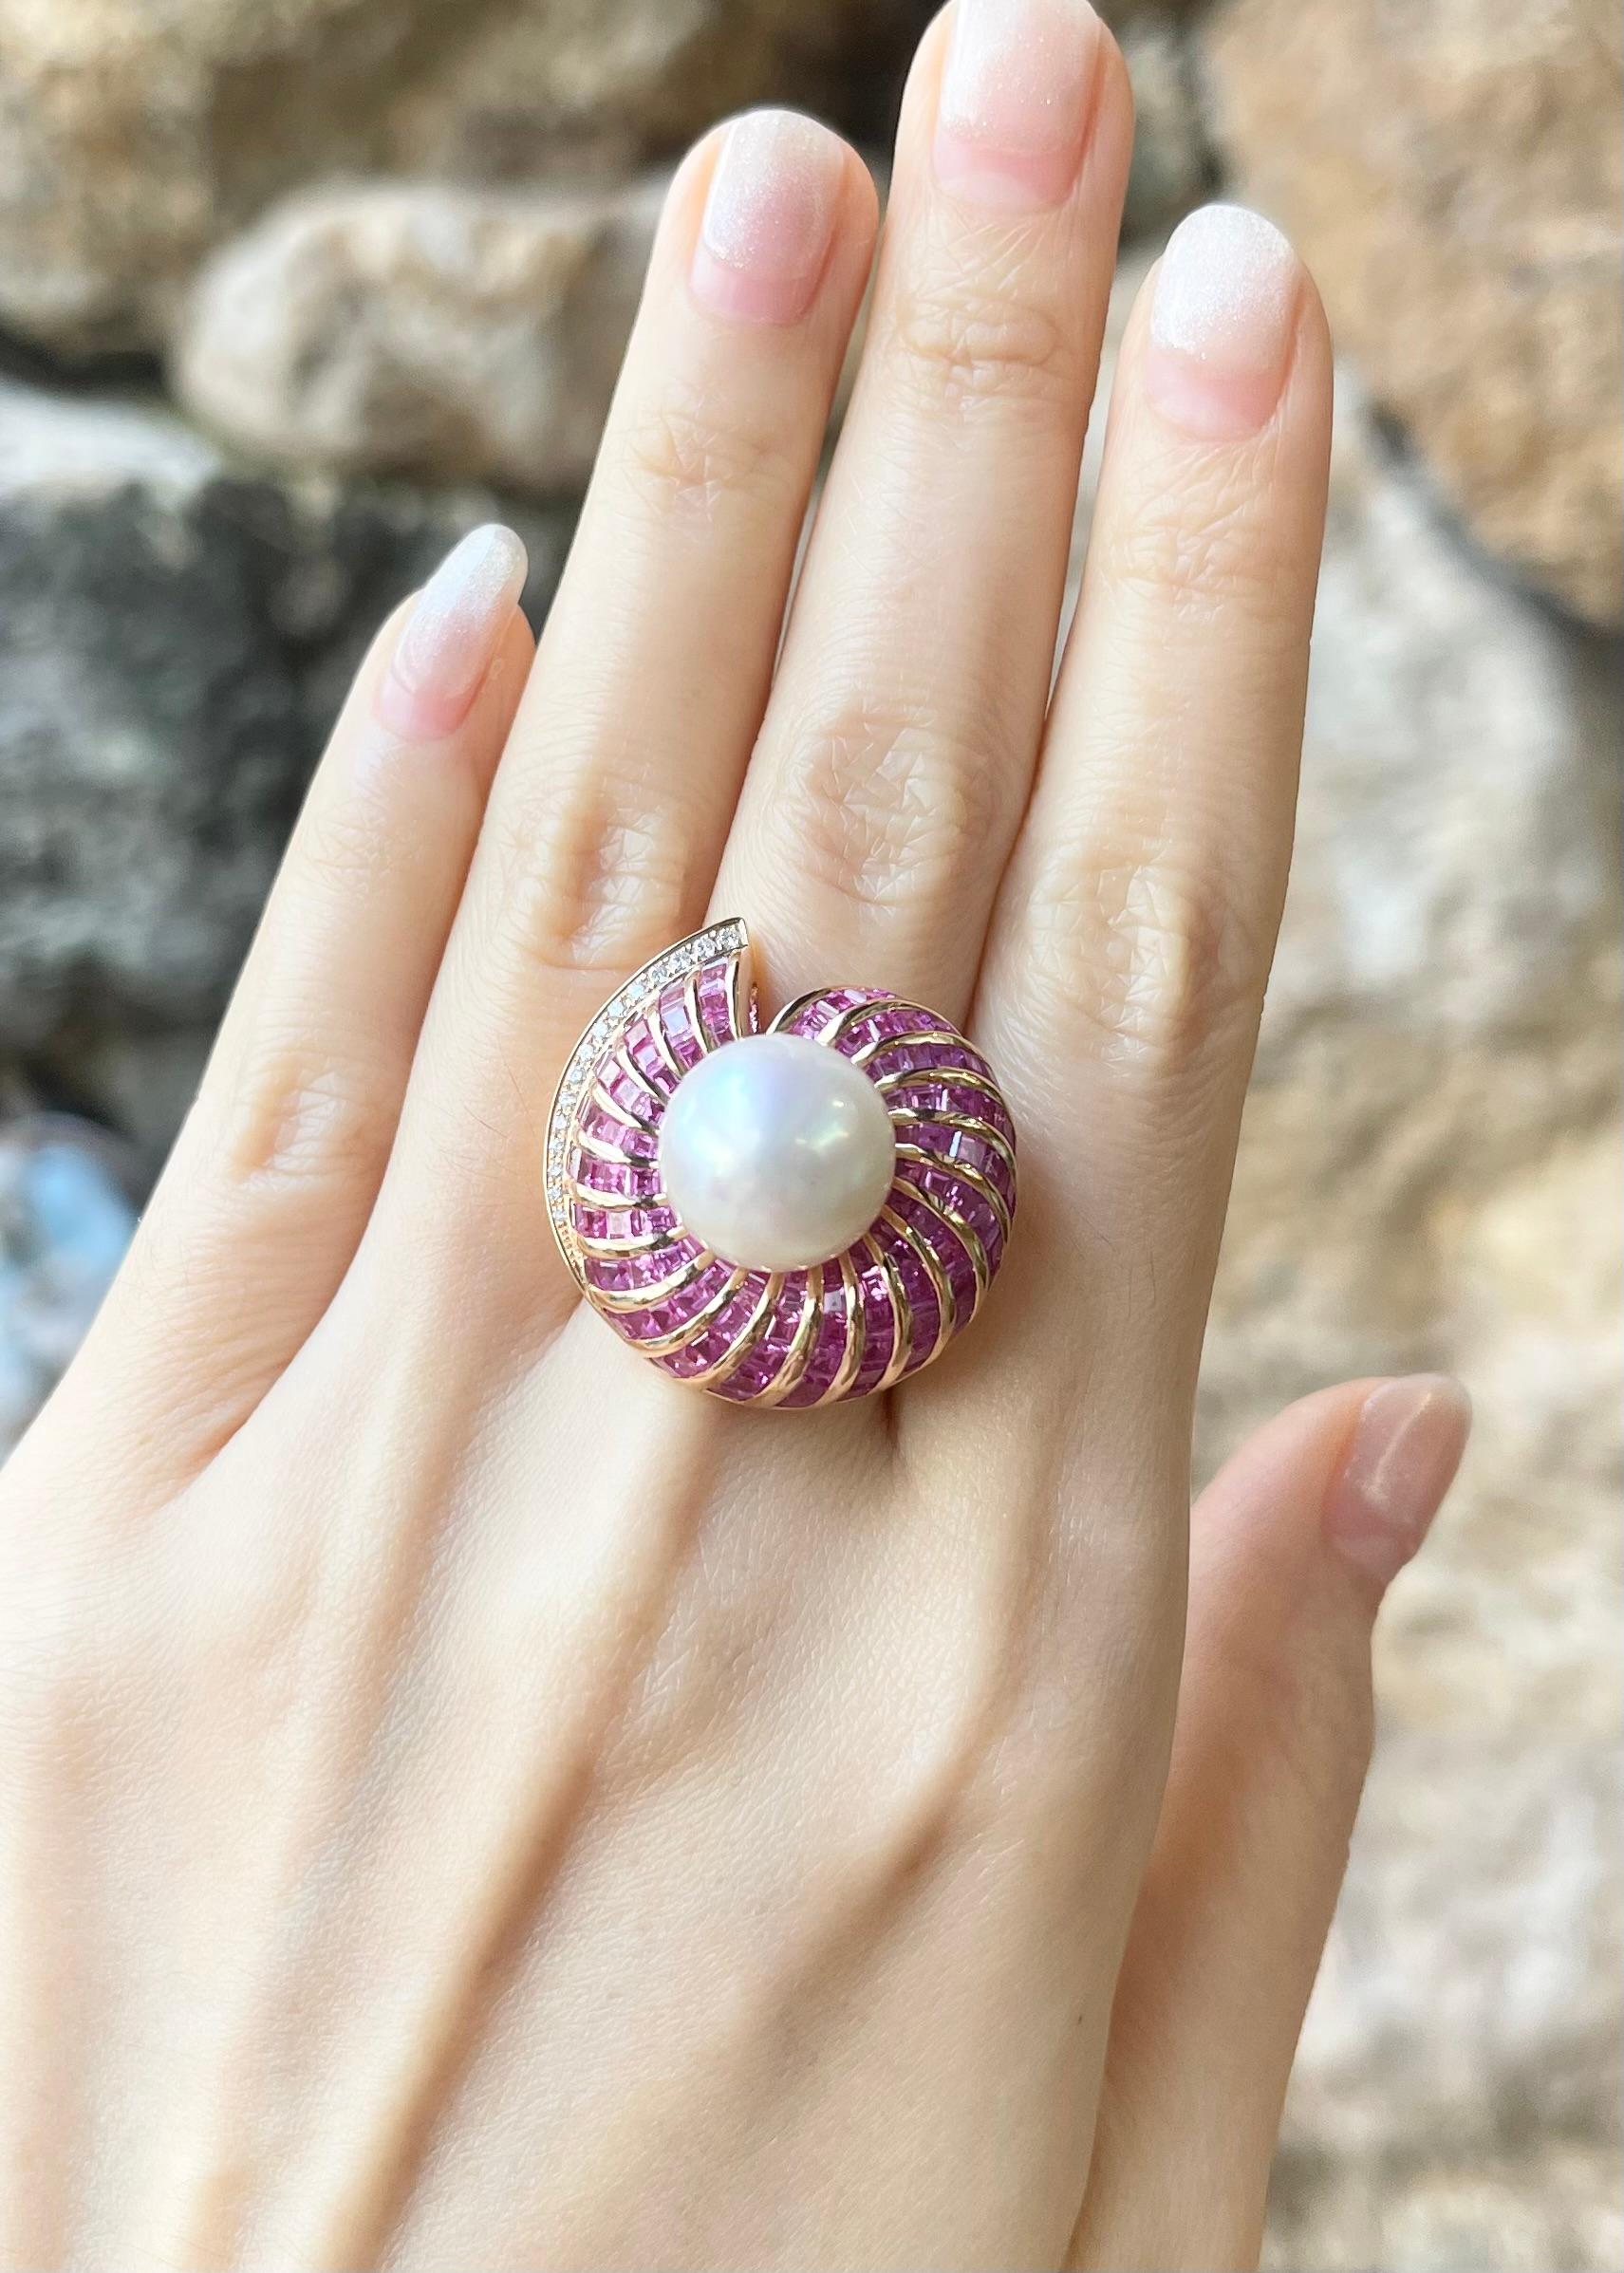 South Sea Pearl, Pink Sapphire 5.30 carats and Diamond 0.12 carat Ring set in 18K Rose Gold Settings

Width:  2.6 cm 
Length: 2.8 cm
Ring Size: 56
Total Weight: 21.19 grams

